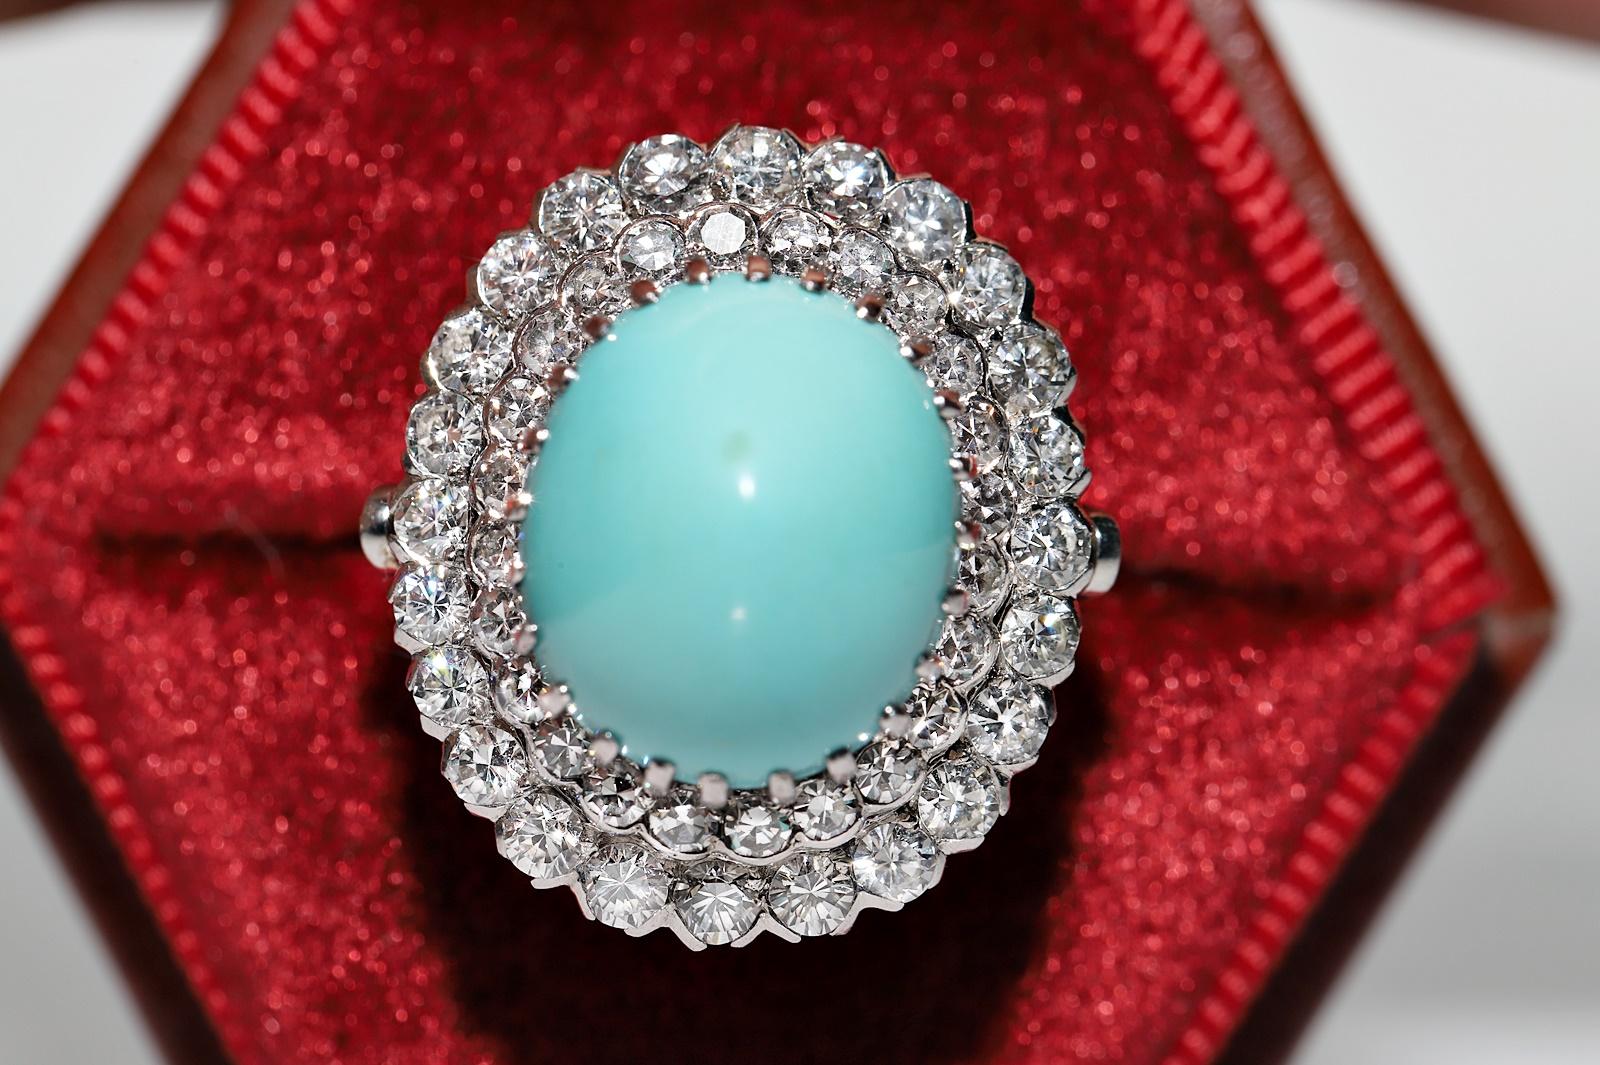 Vintage Circa 1970s Platinum Natural Diamond And Turquoise Decorated Ring In Good Condition For Sale In Fatih/İstanbul, 34